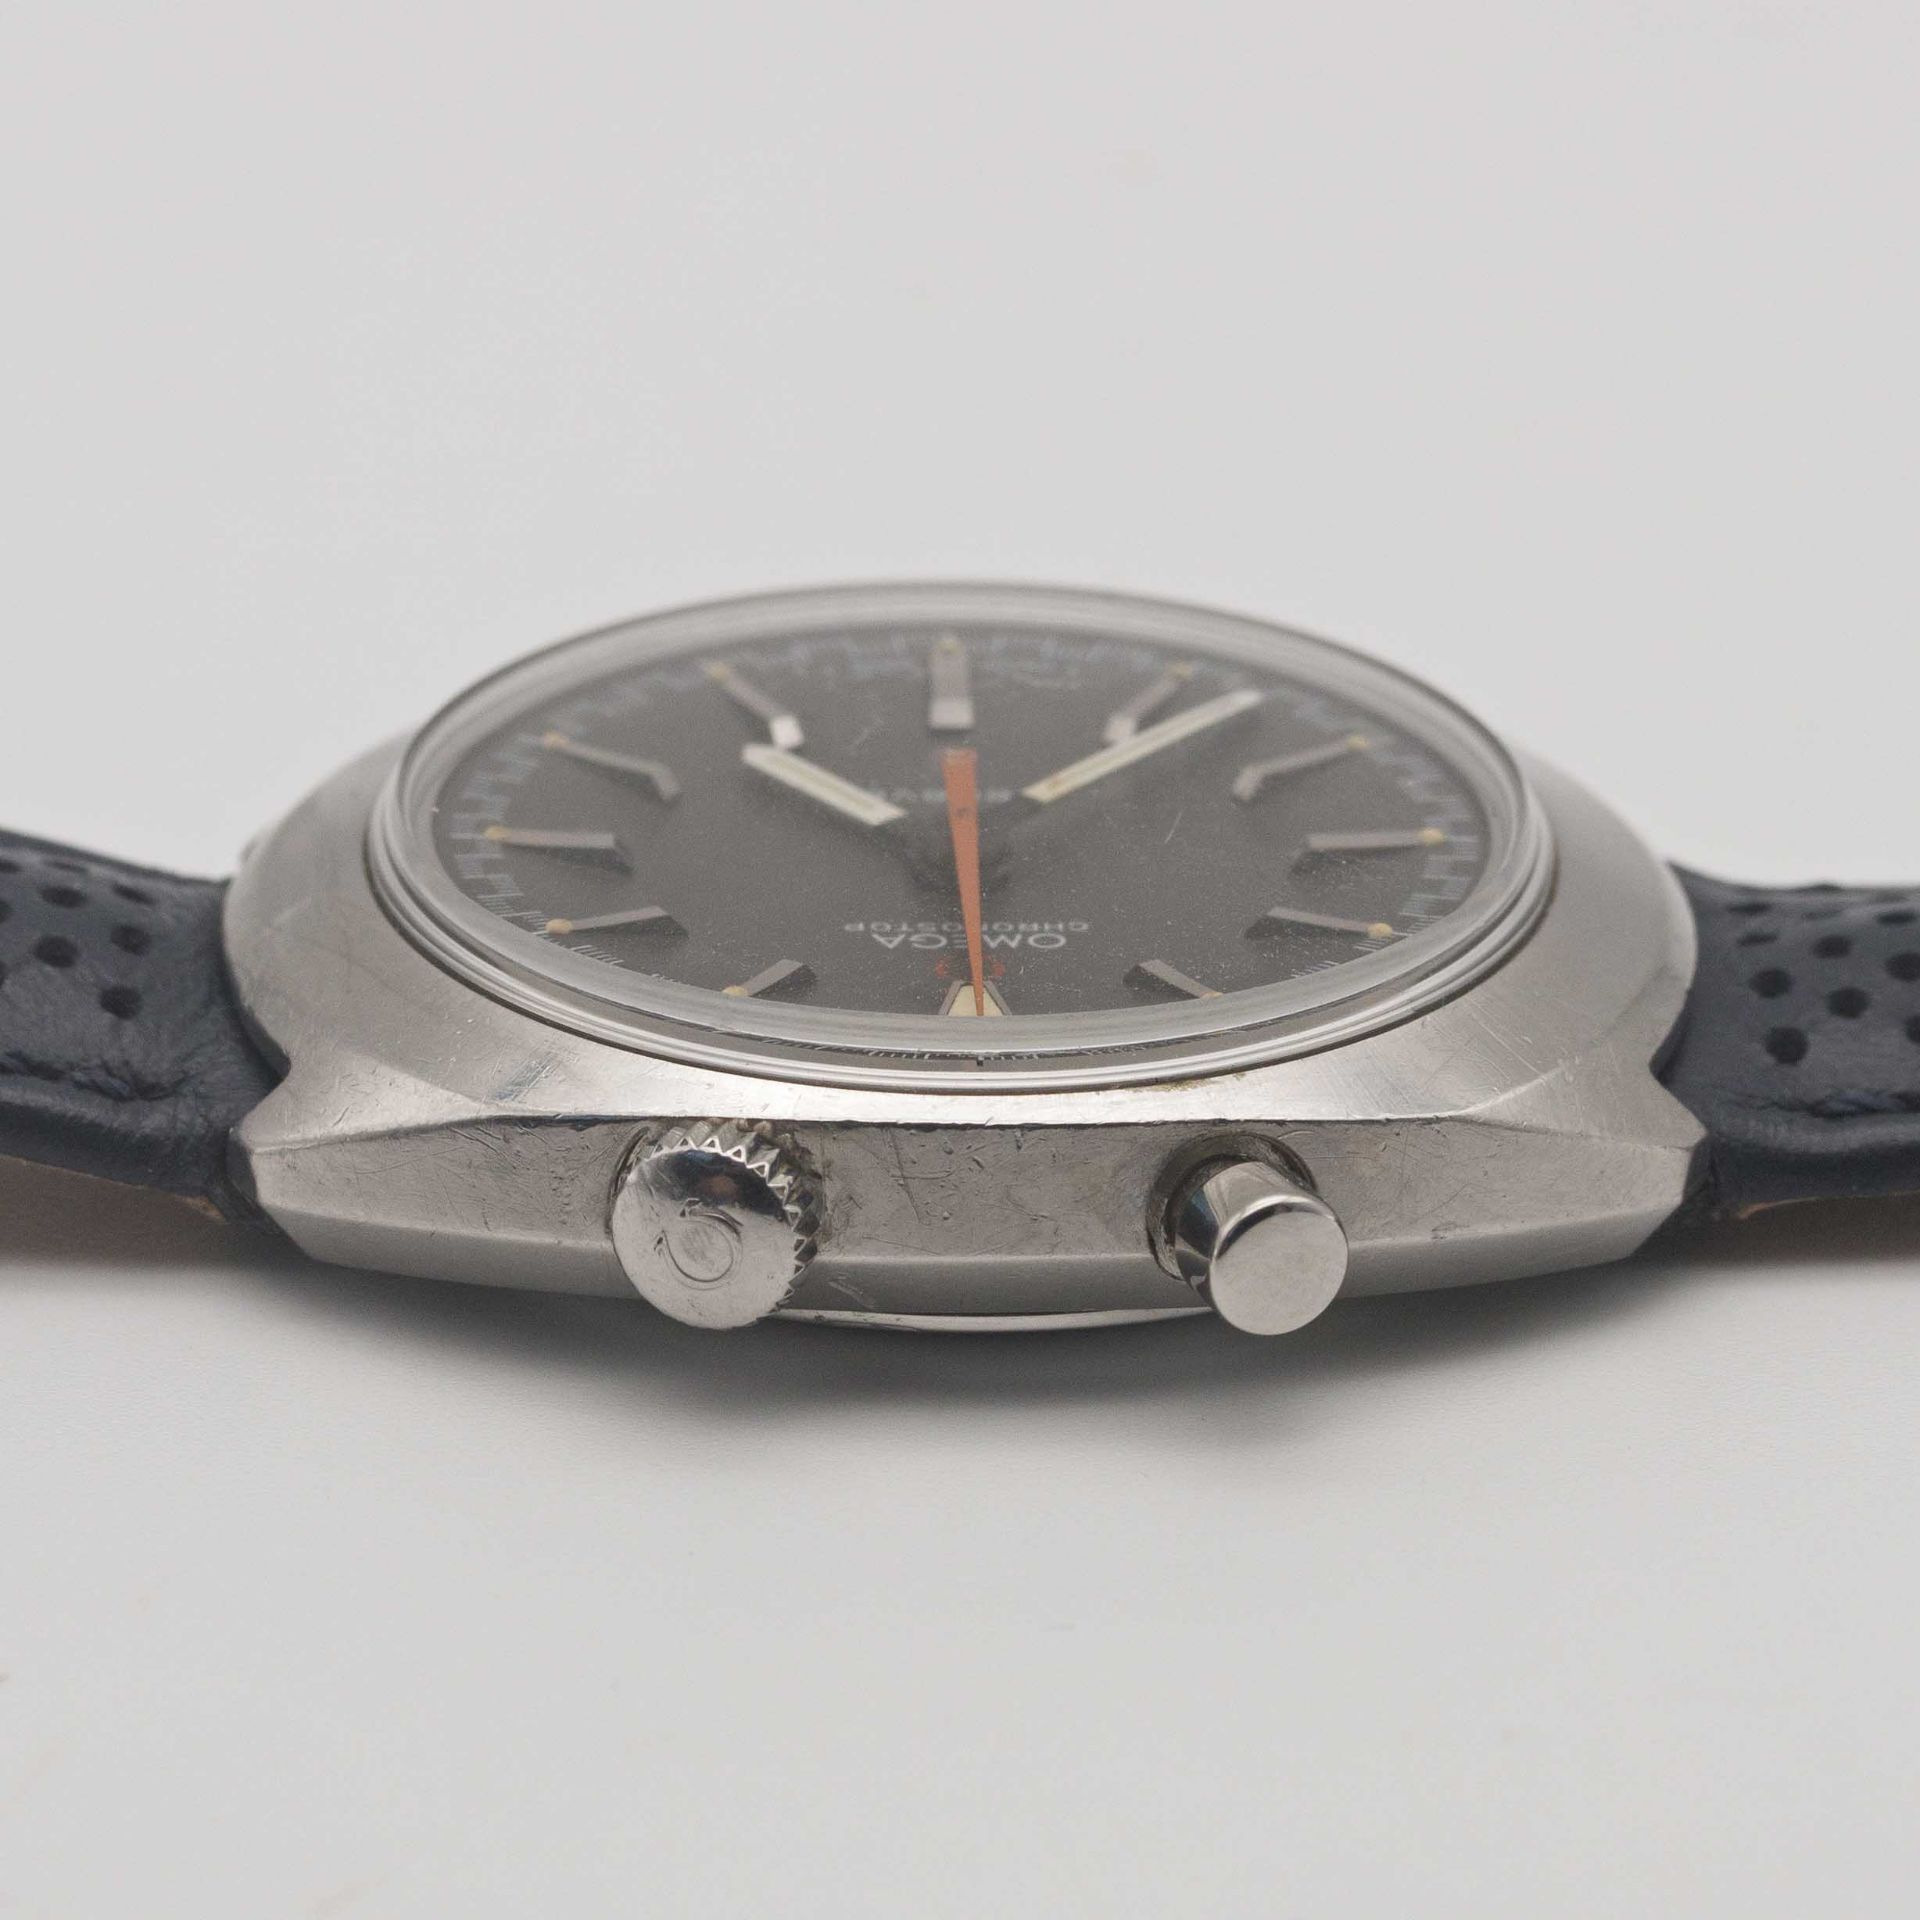 A GENTLEMAN'S STAINLESS STEEL OMEGA CHRONOSTOP DRIVERS WRIST WATCH CIRCA 1967, REF. 145.010 WITH - Image 8 of 9